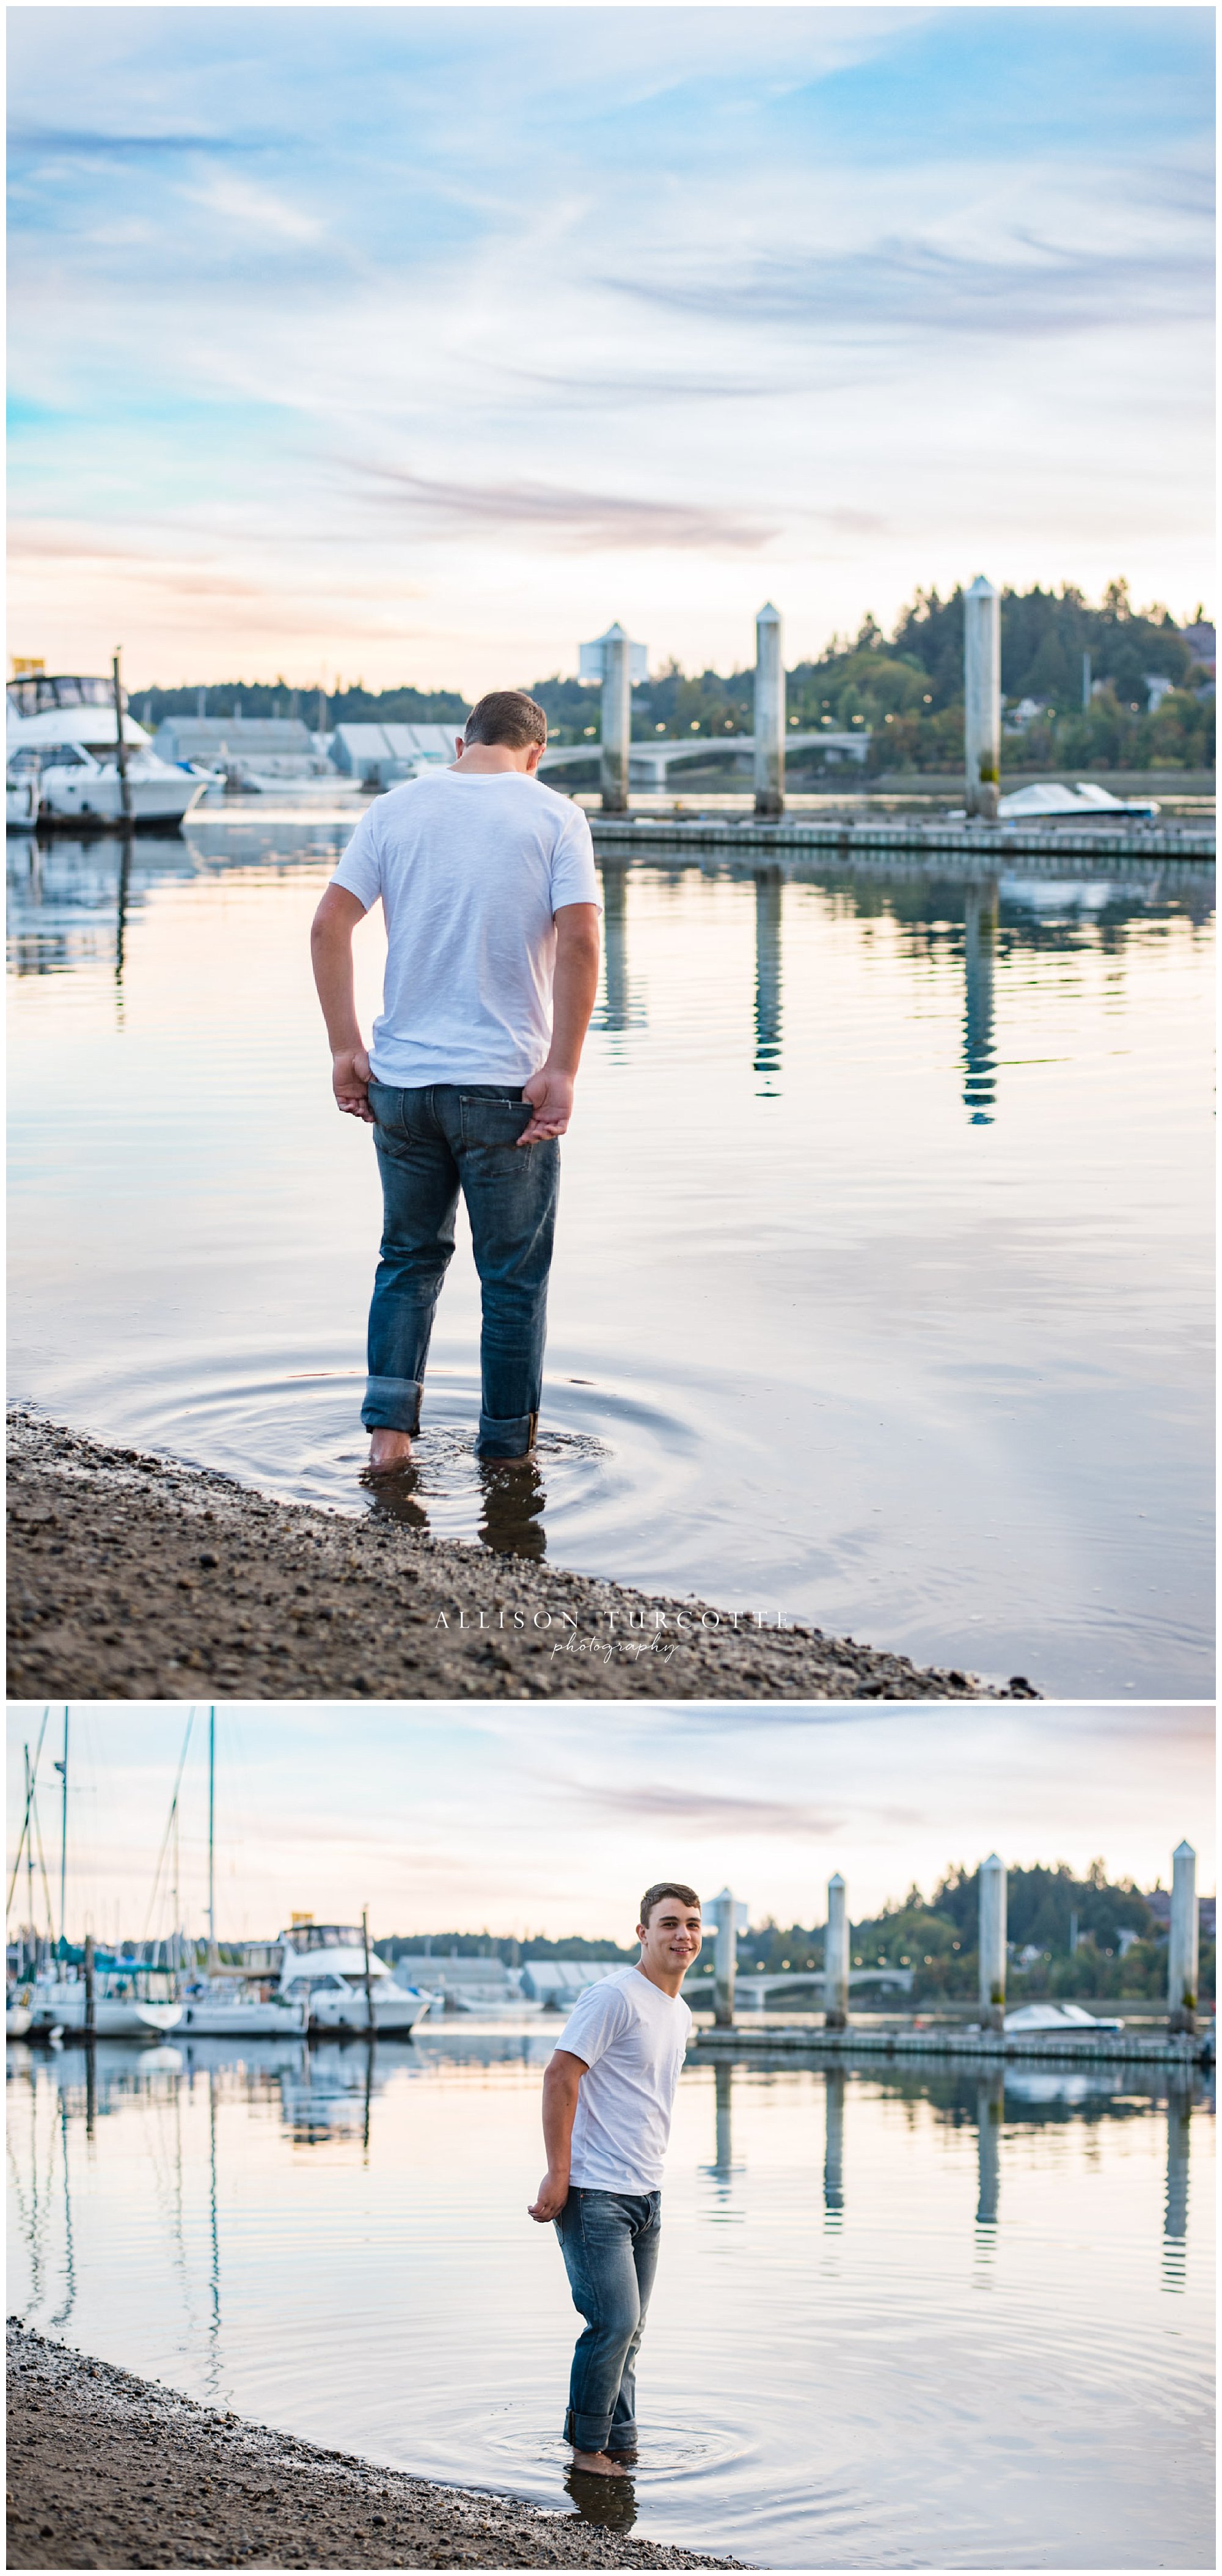 In the water, Senior Photographer, Photography, Yelm Photographer